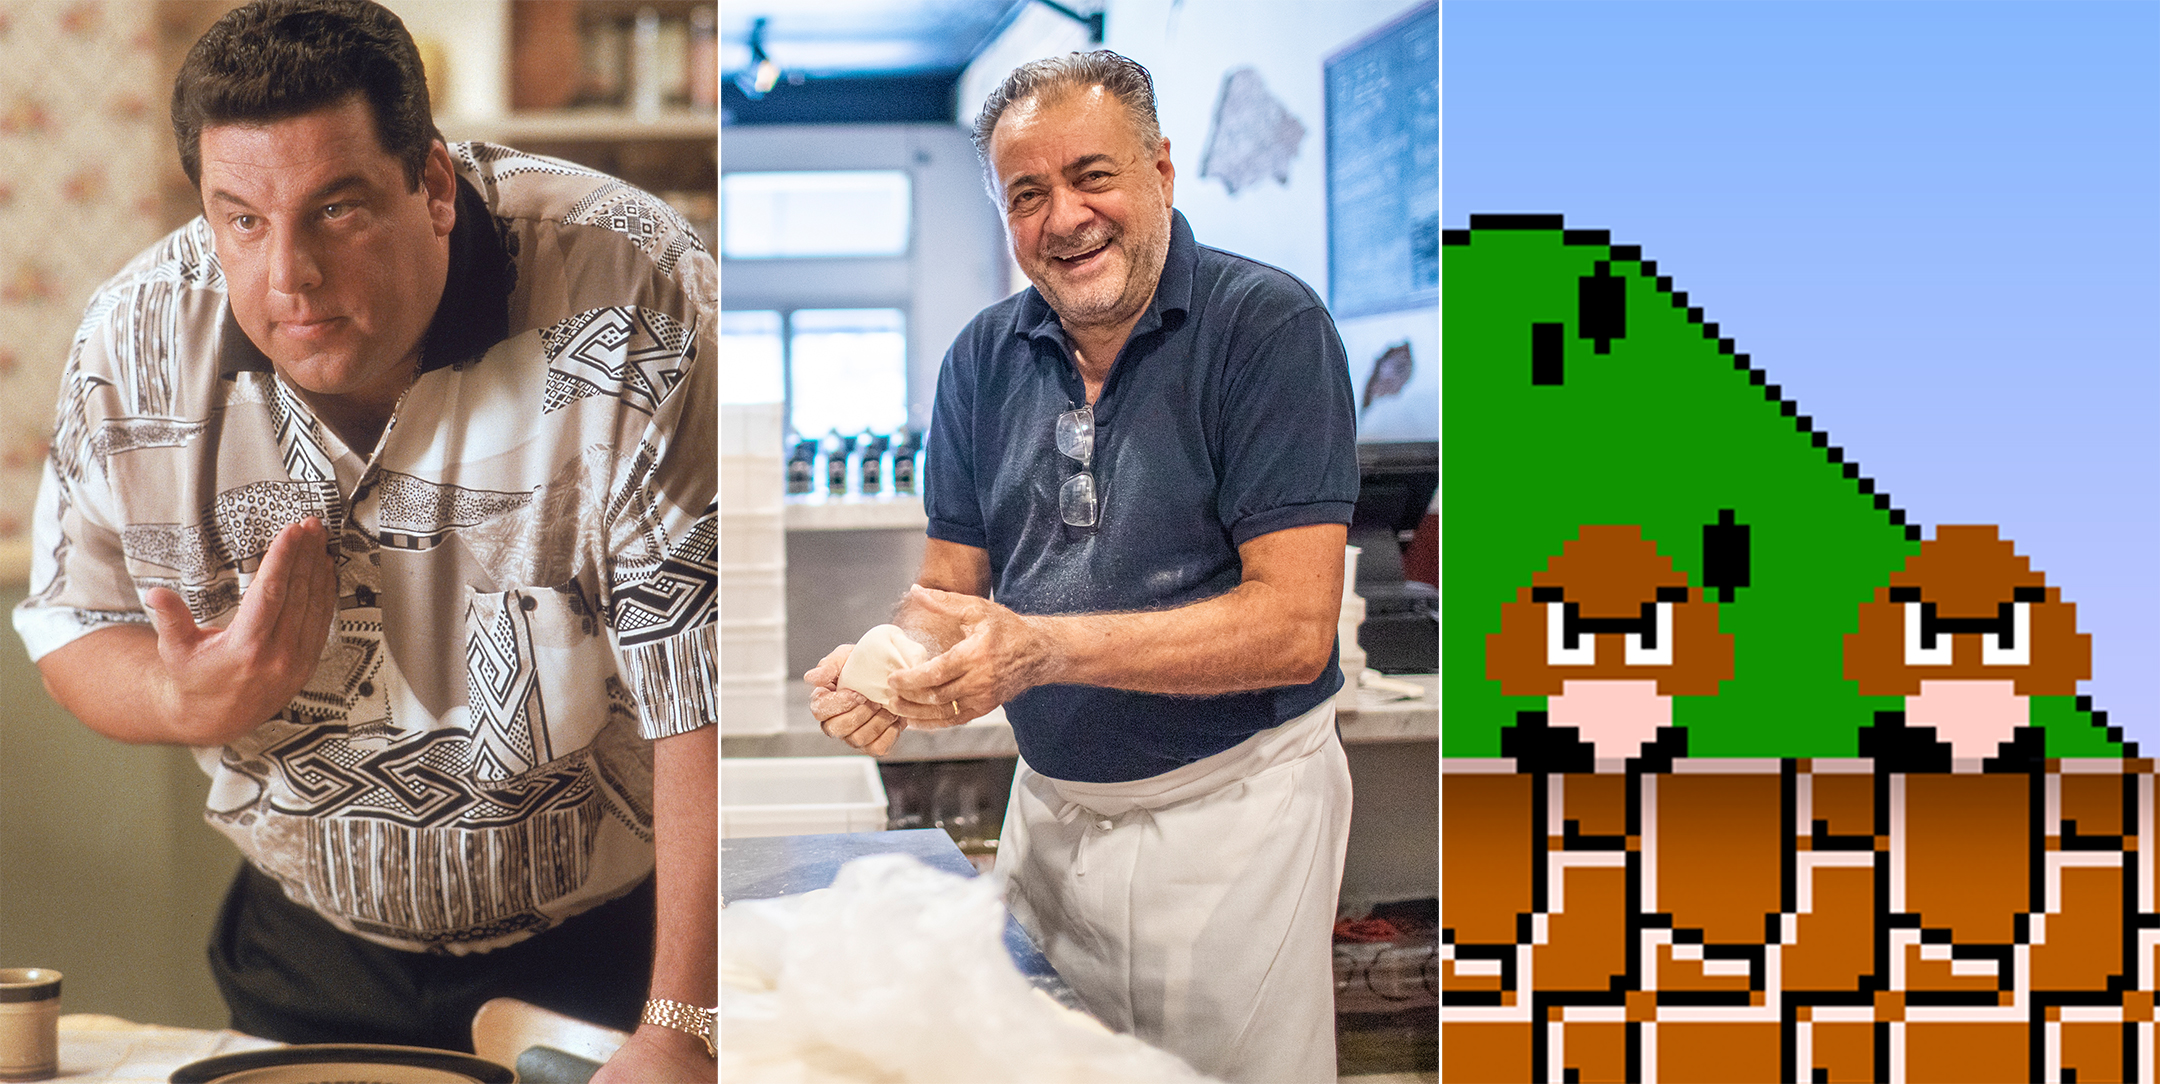 Three photos in a row showing, from left, a dark haired Italian man pointing at himself, an older Italian man holding pizza dough, and a screenshot from Super Mario Bros.